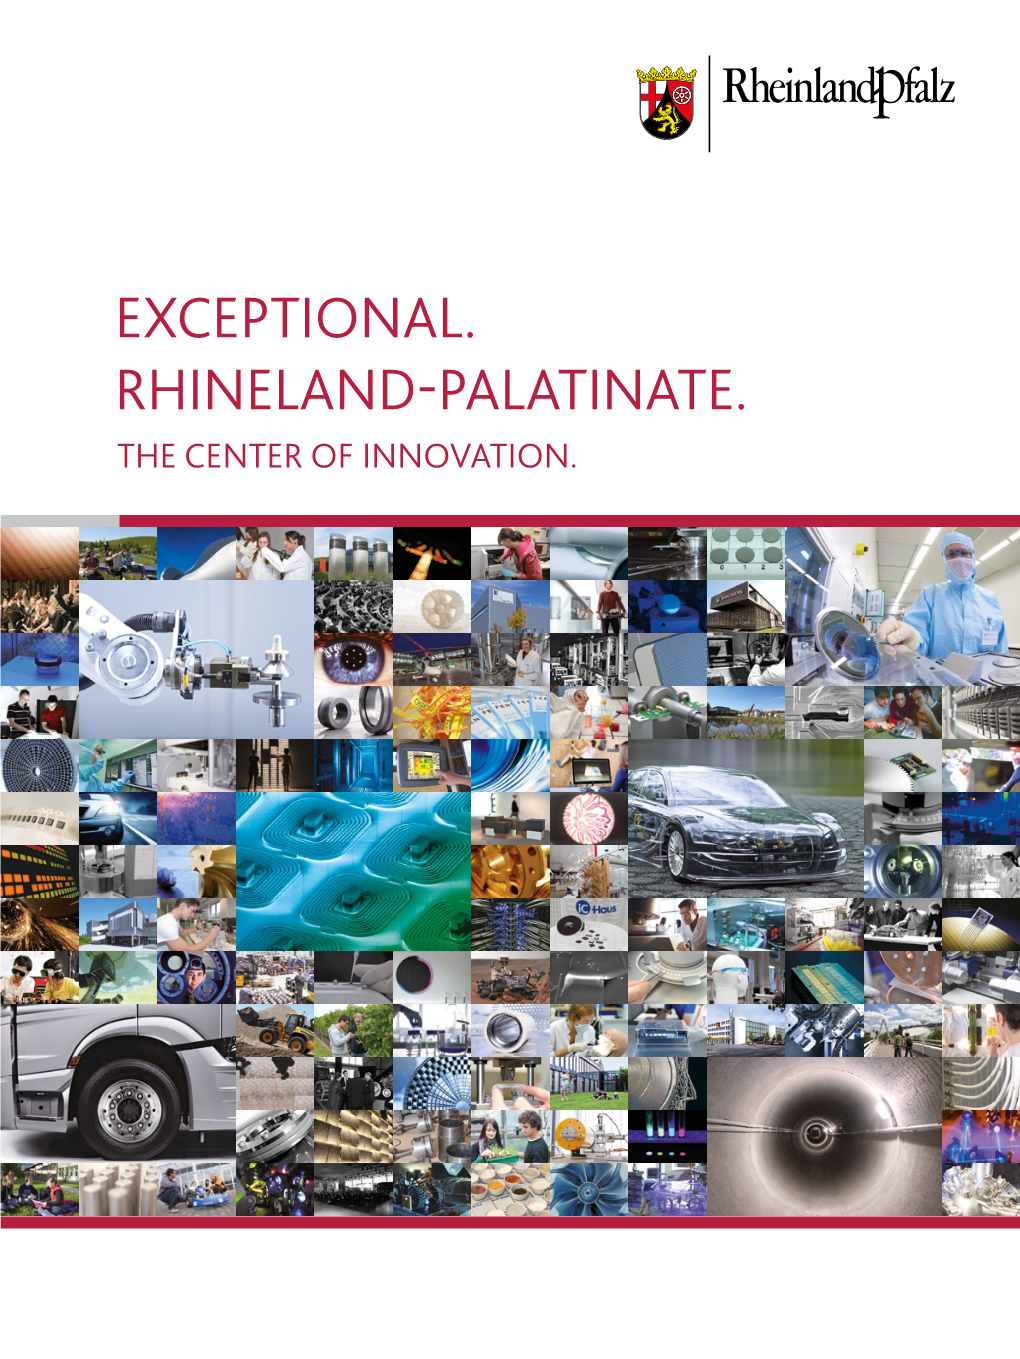 Exceptional. Rhineland-Palatinate. the Center of Innovation